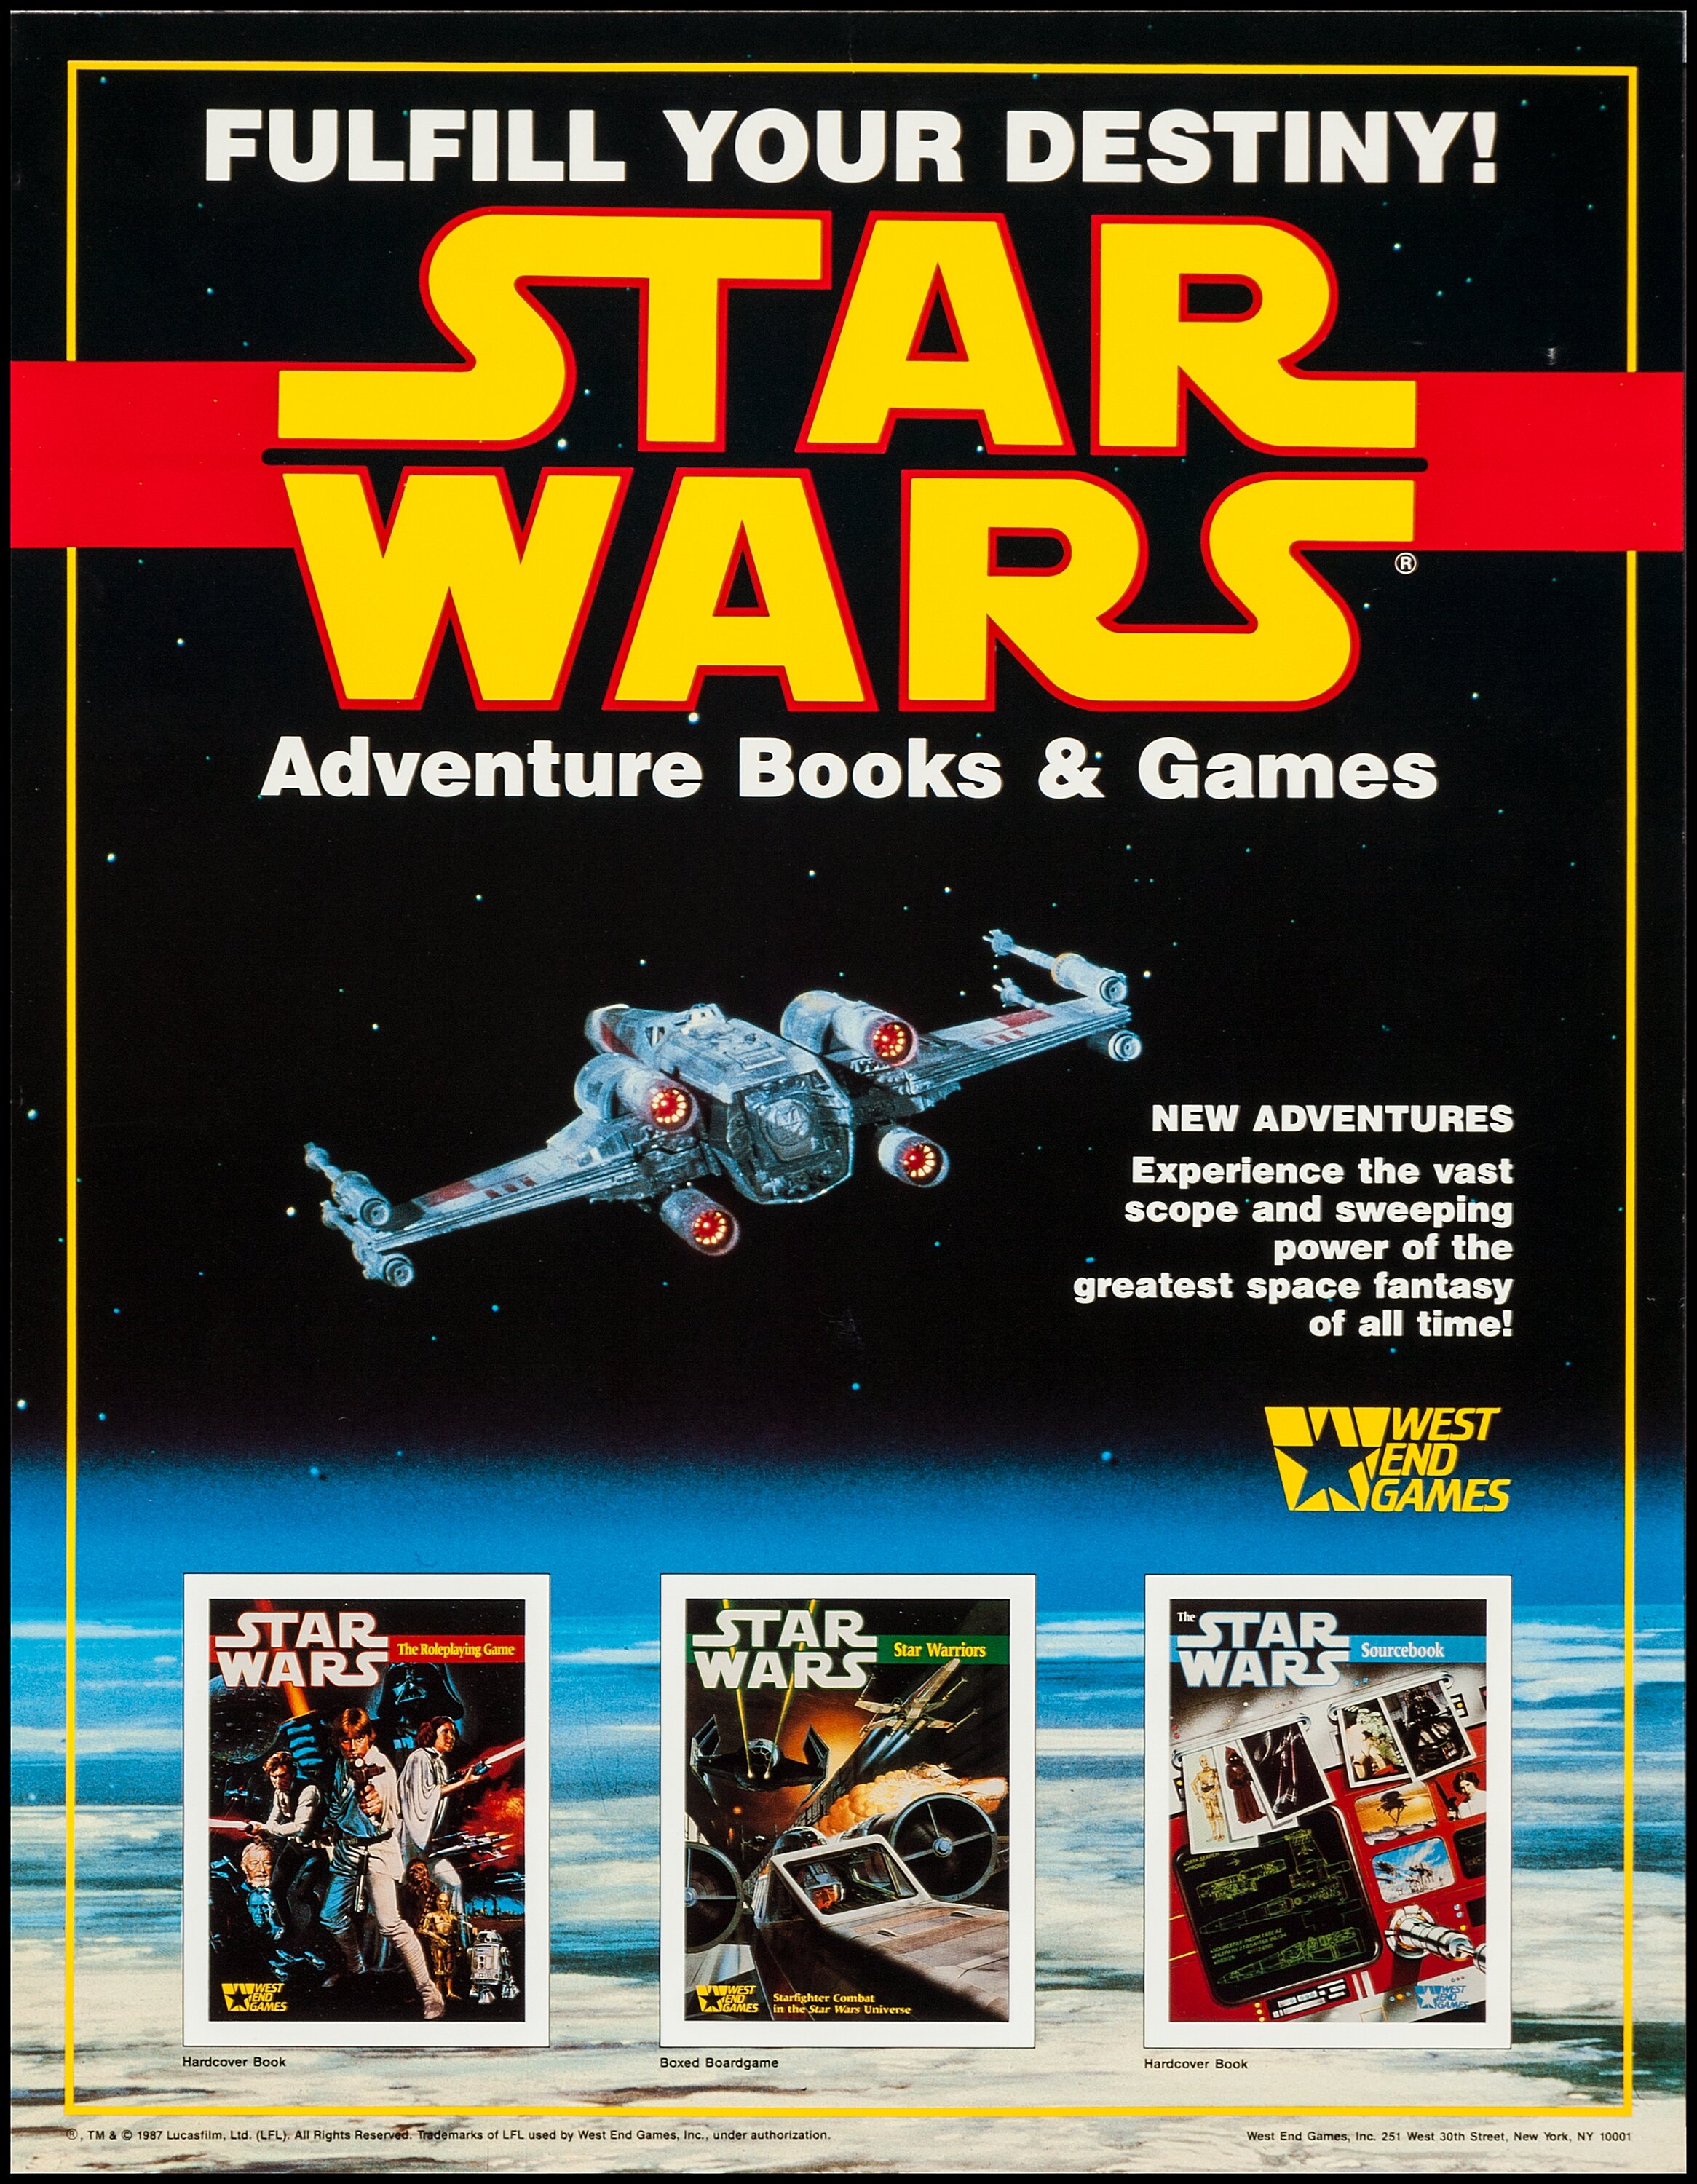 Star Wars: The Roleplaying Game (West End Games, 1987). Poster (17, Lot  #52477